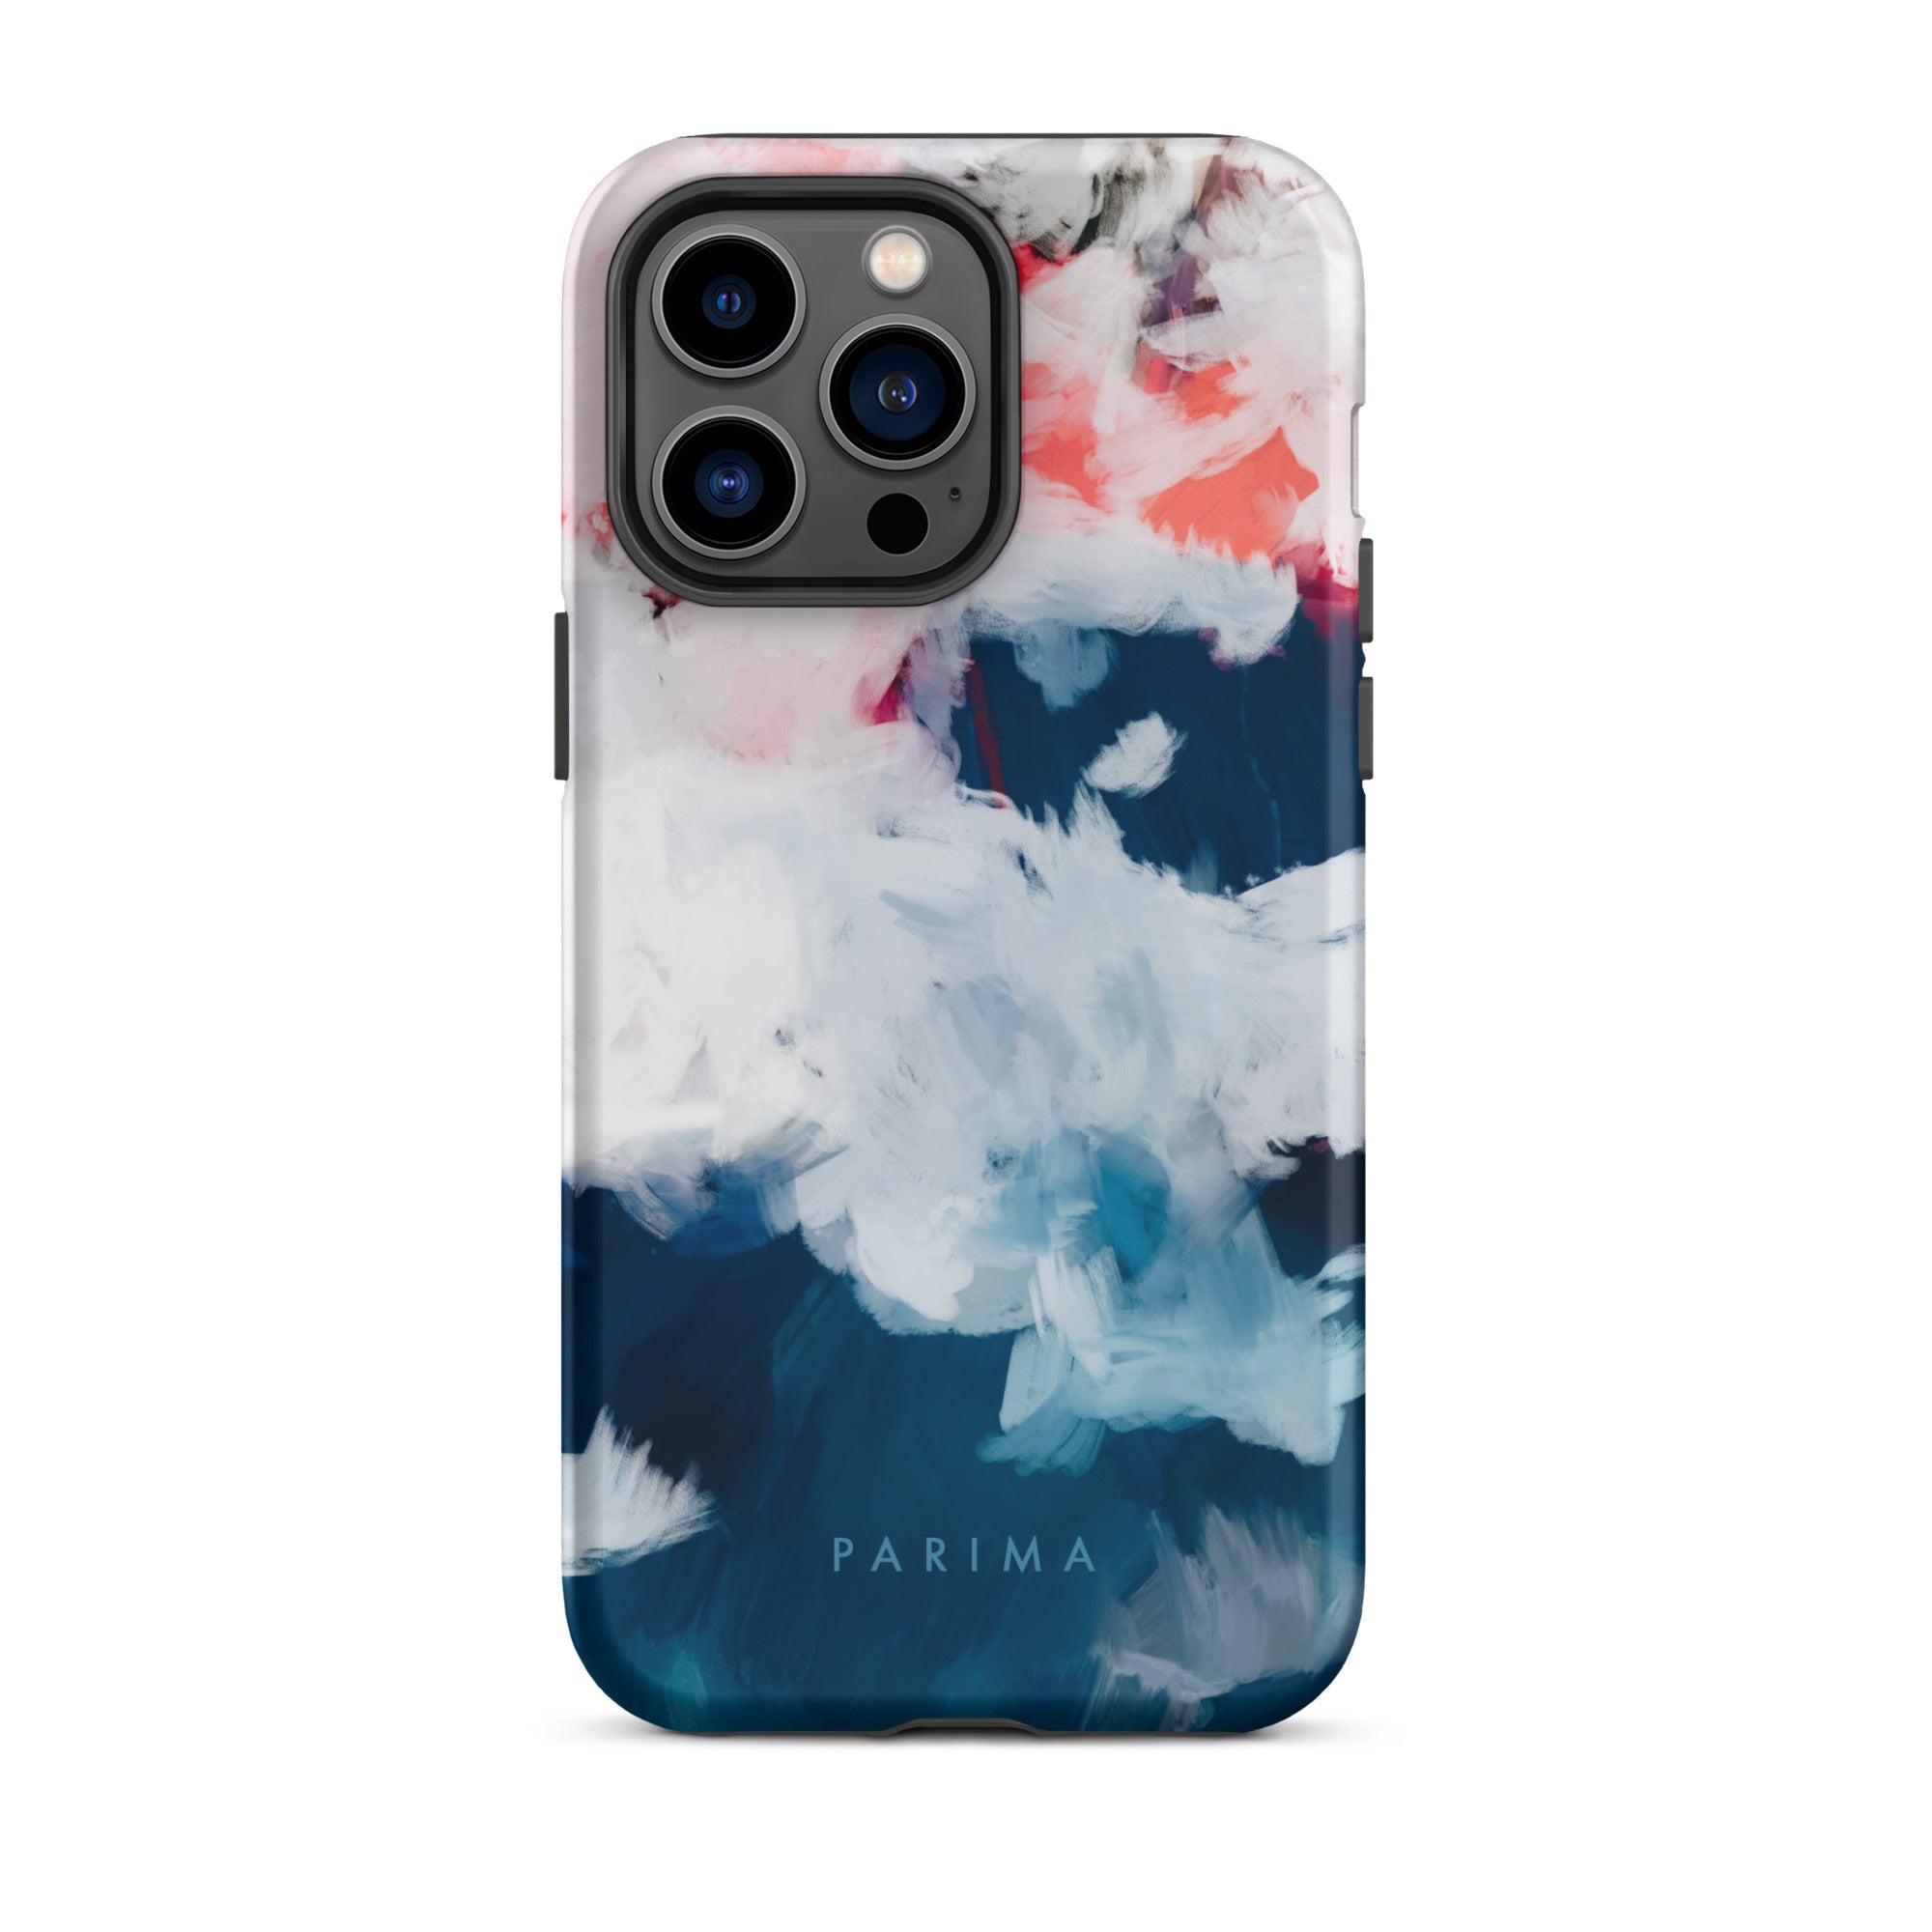 Oceane, blue and pink abstract art on iPhone 14 Pro Max tough case by Parima Studio